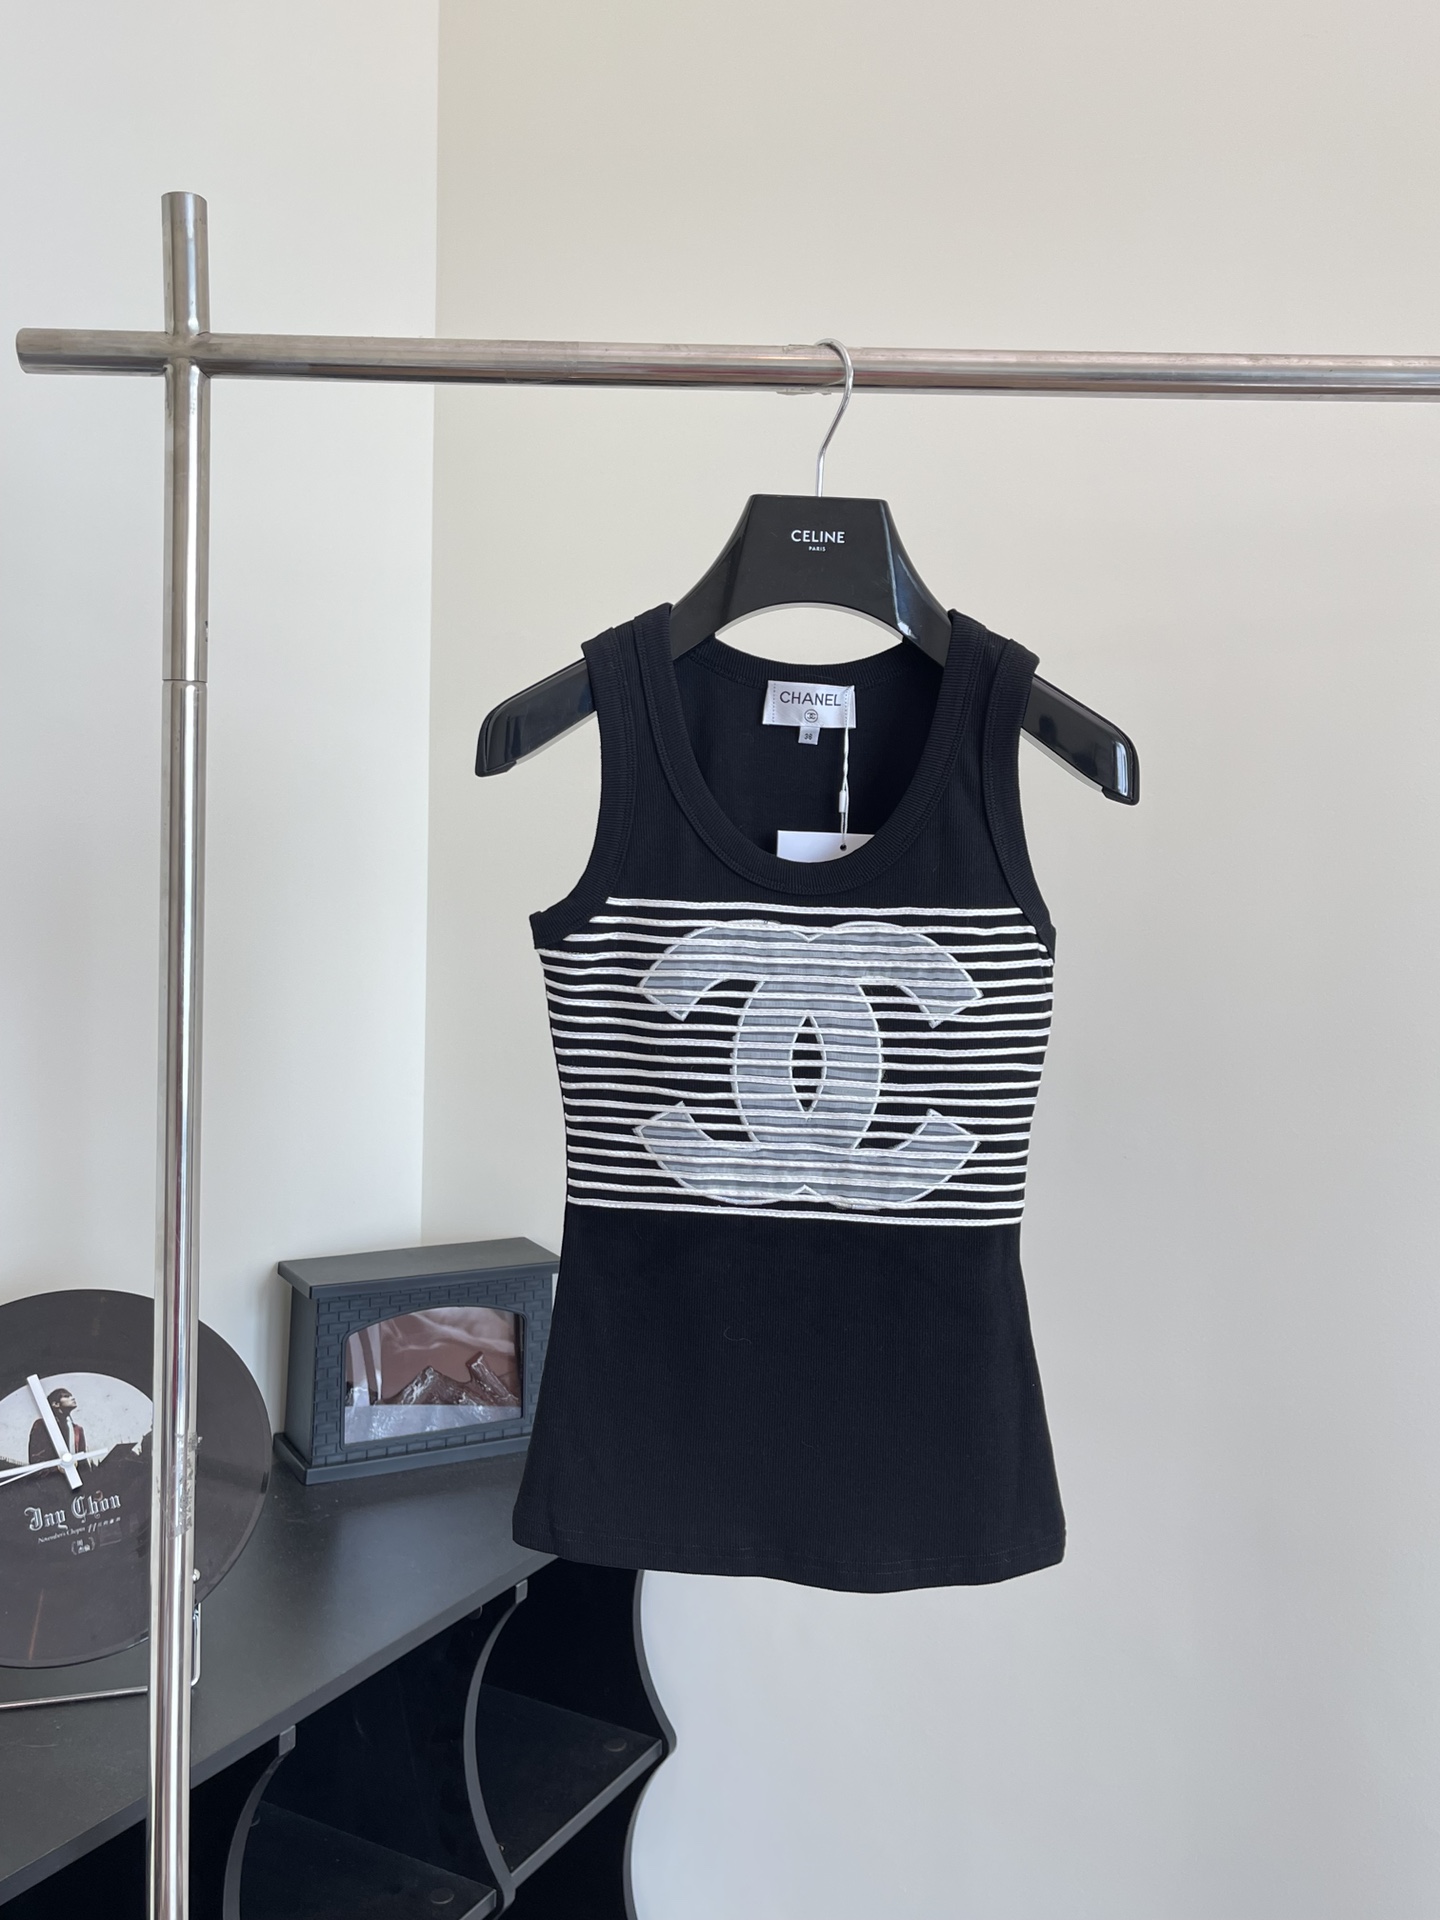 Chanel Clothing Tank Tops&Camis Cotton Knitting